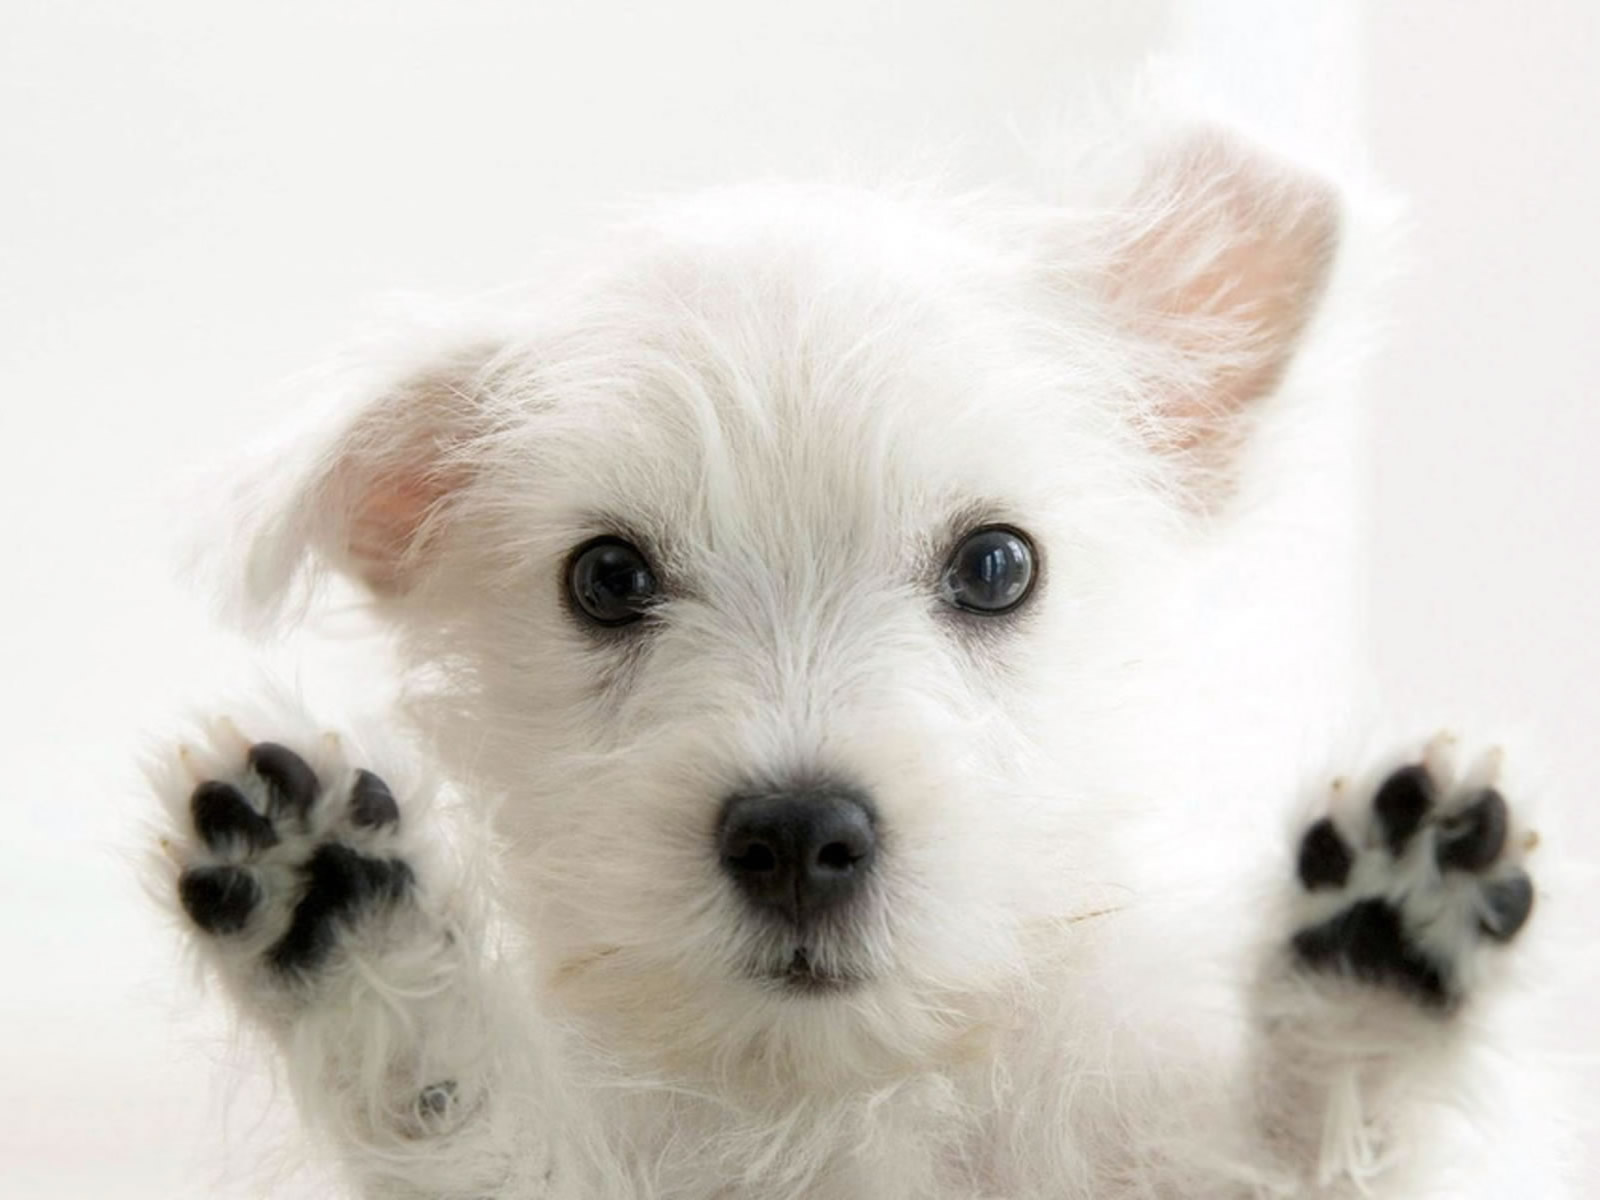  Cute White Dog Photo Wallpaper on this Dogs Wallpapers Backgrounds